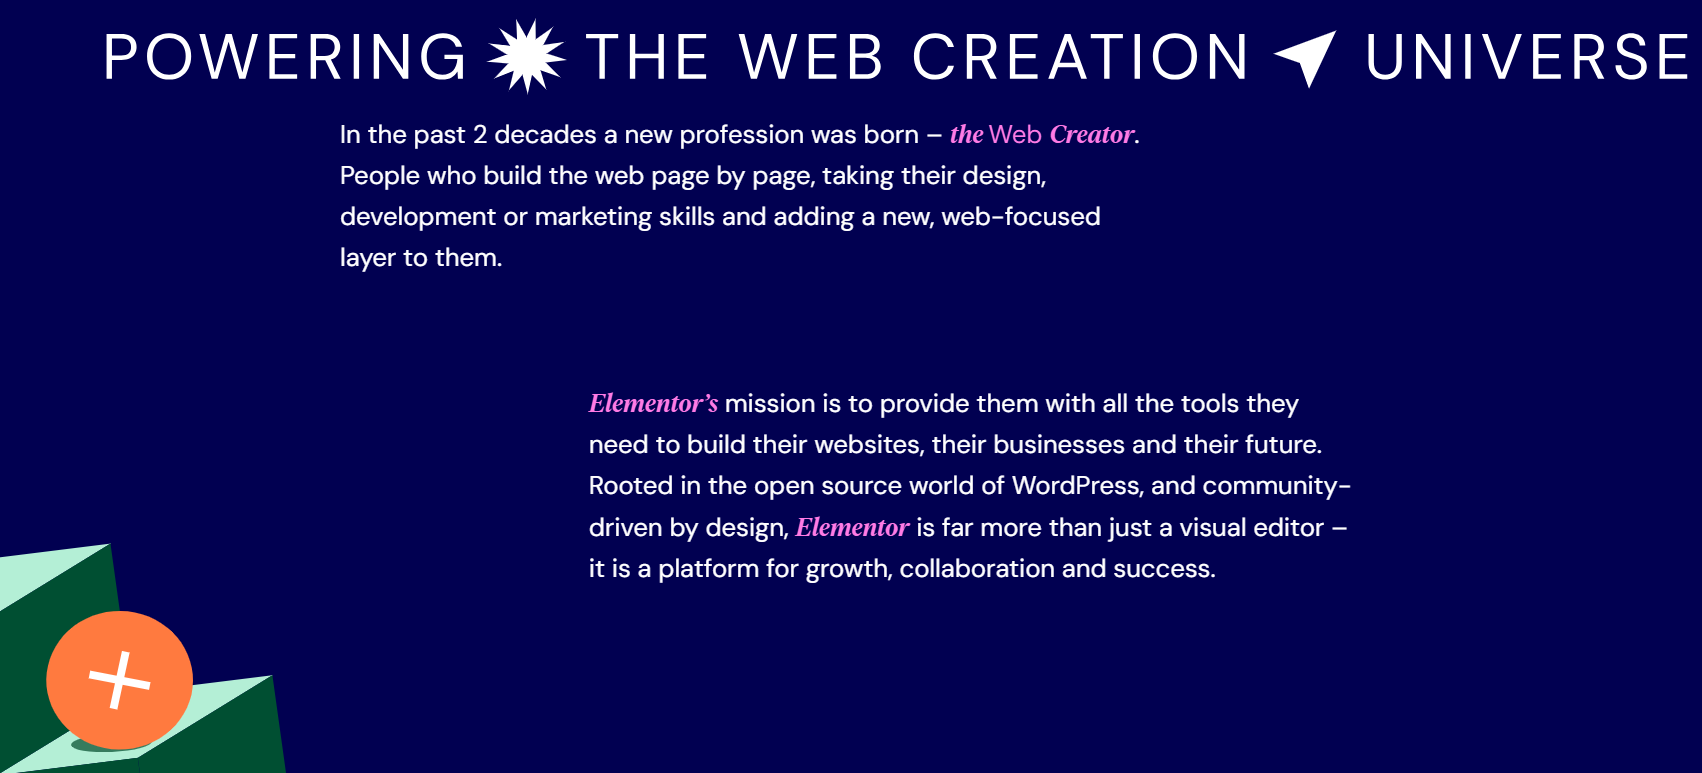 Image from Elementor's "About" page showcasing "The Elementor Story"